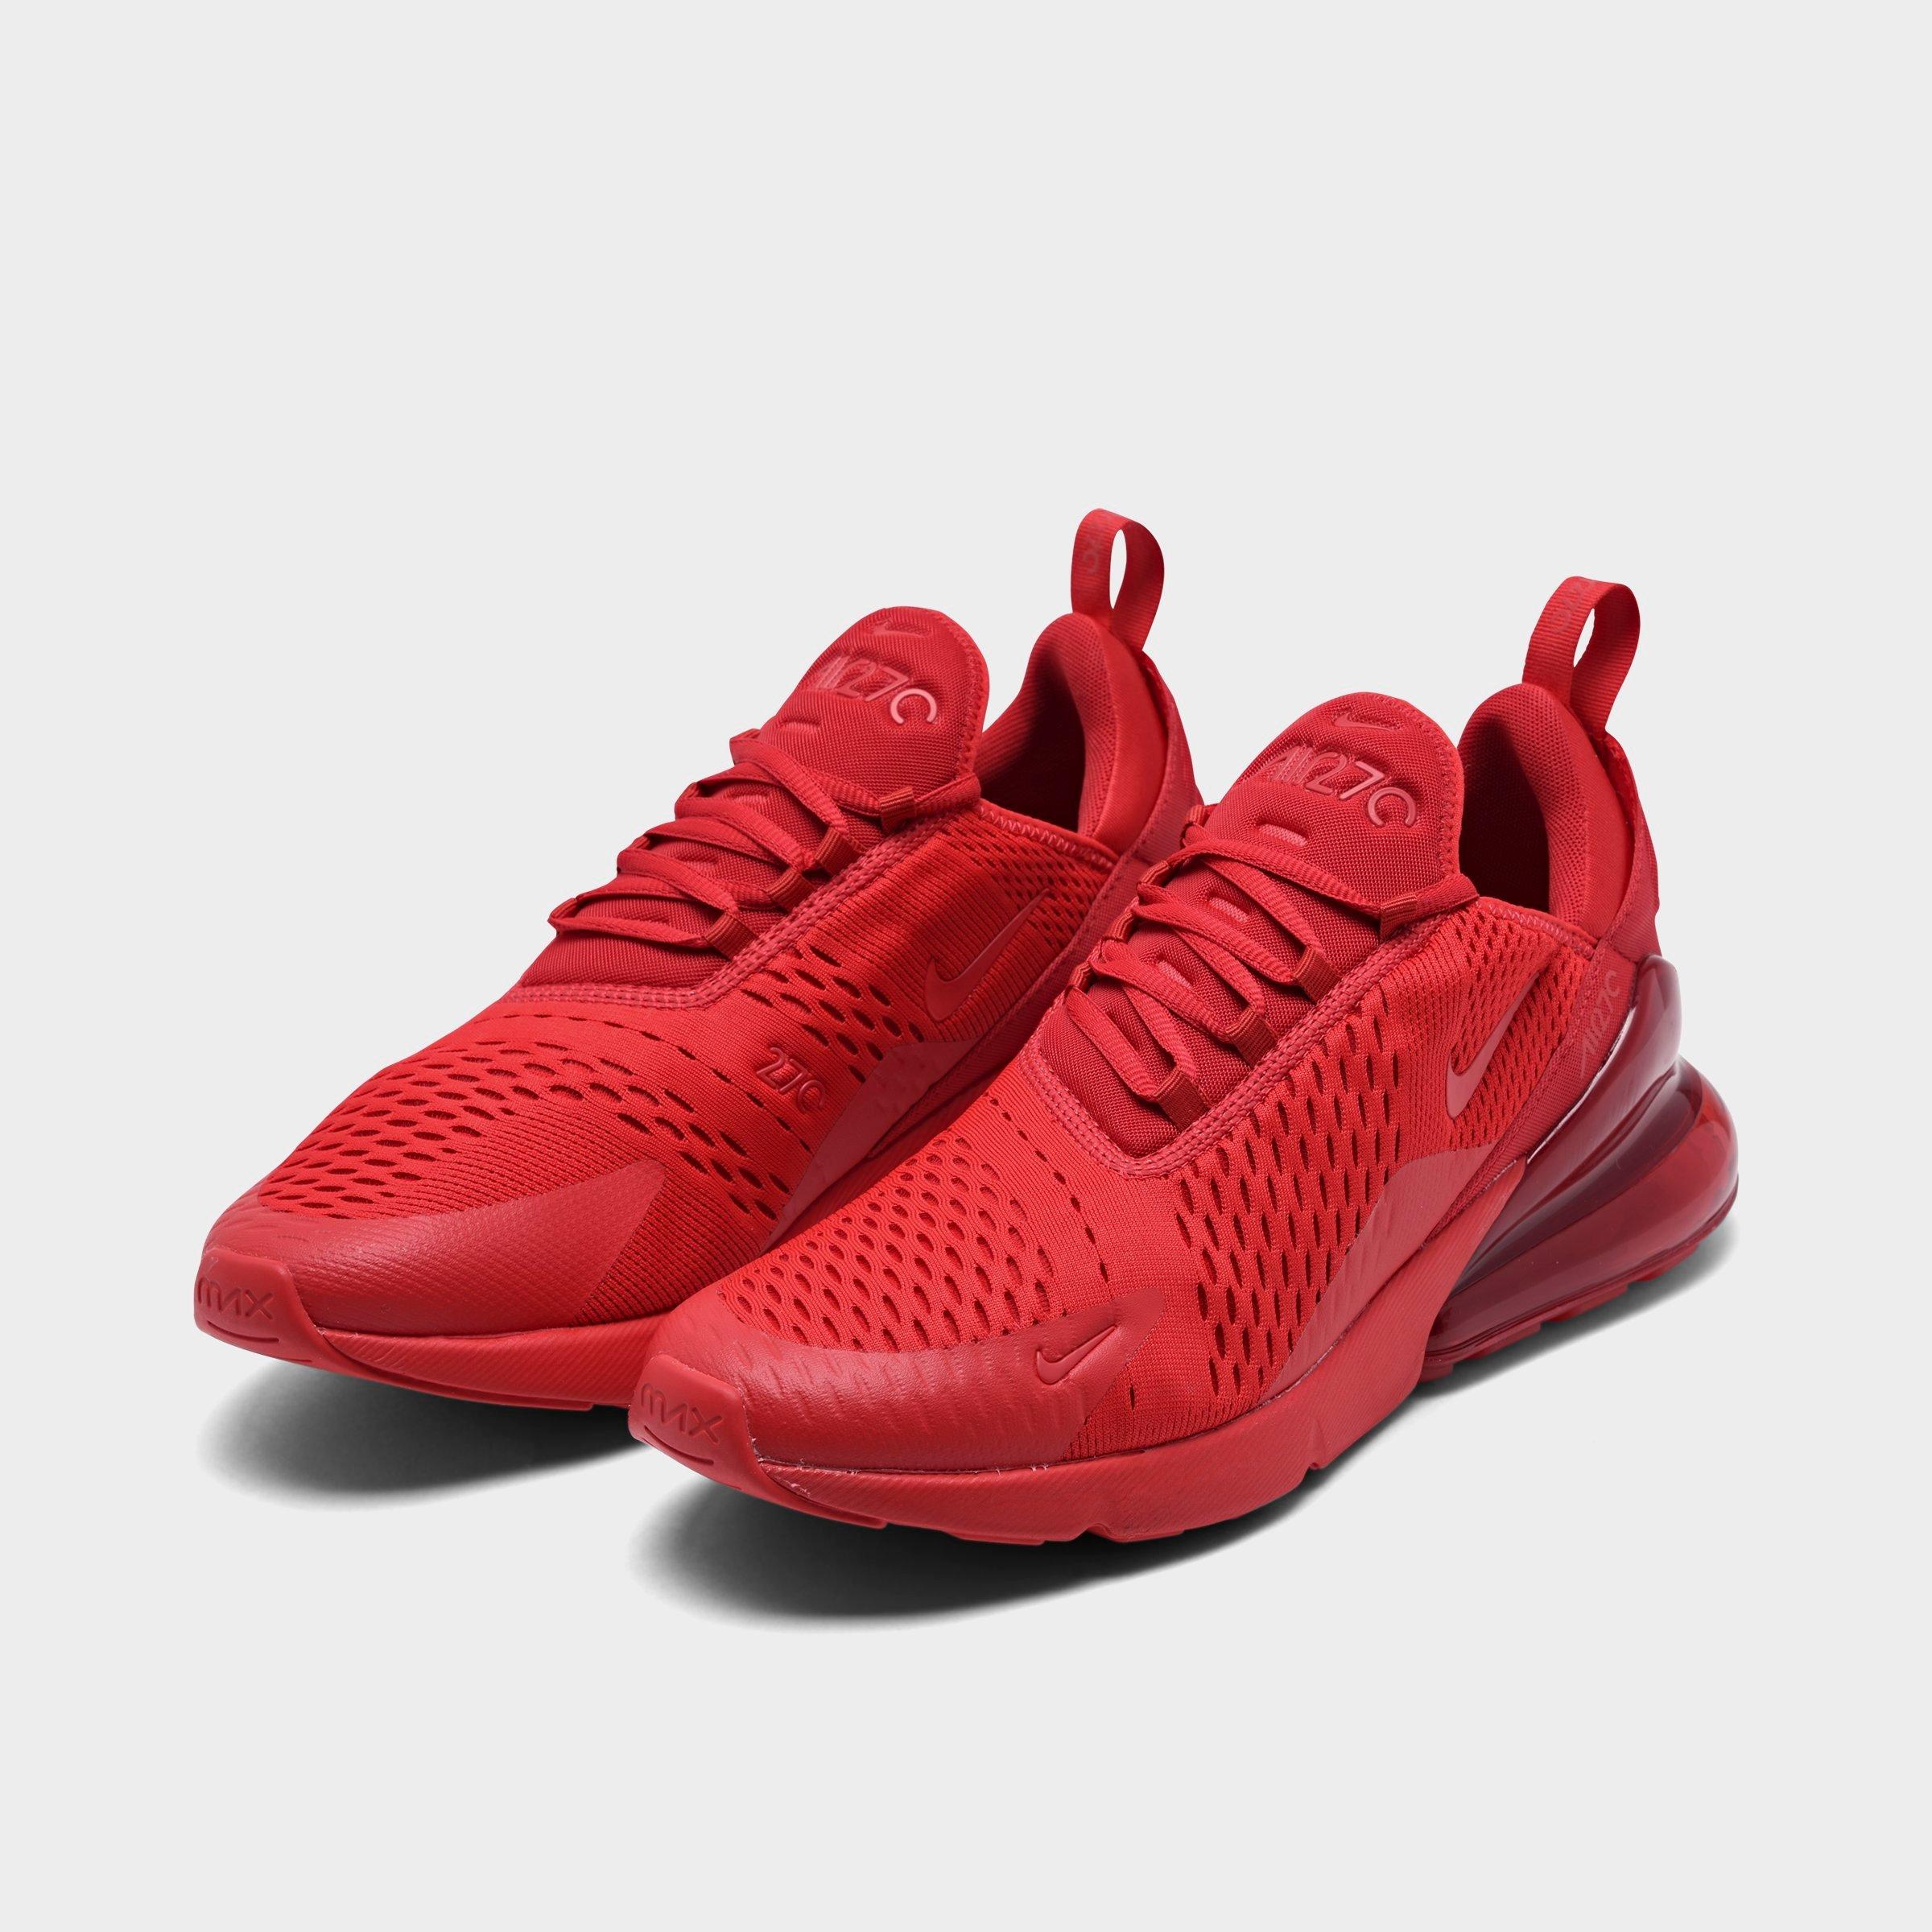 red and black nike air 270